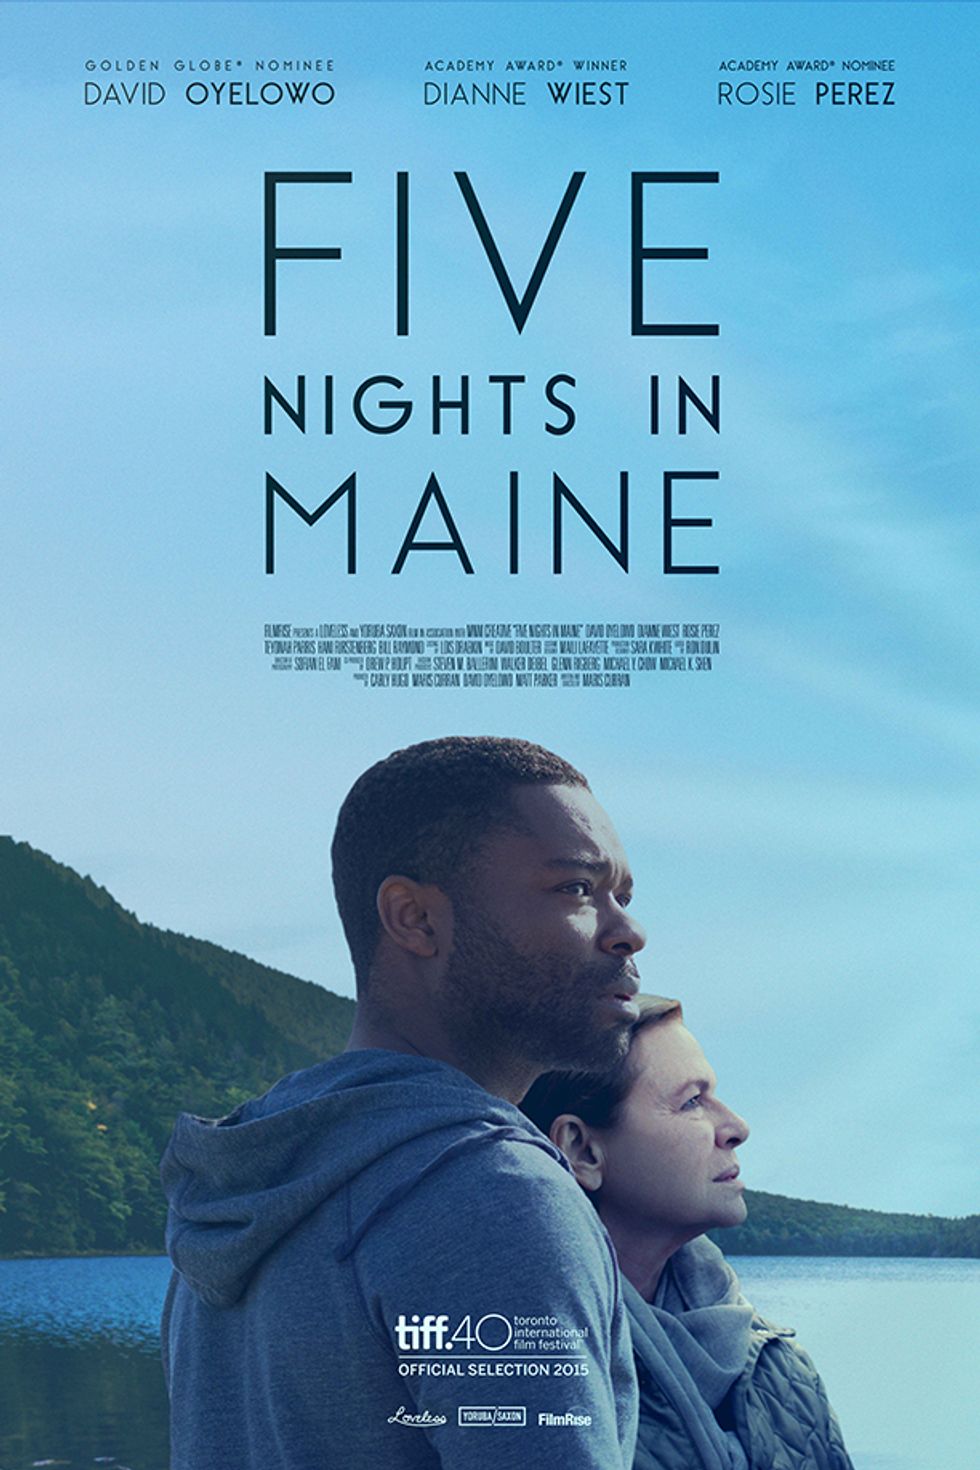 David Oyelowo Confronts Race and the Wilderness in the Emotional Trailer for ‘Five Nights in Maine’